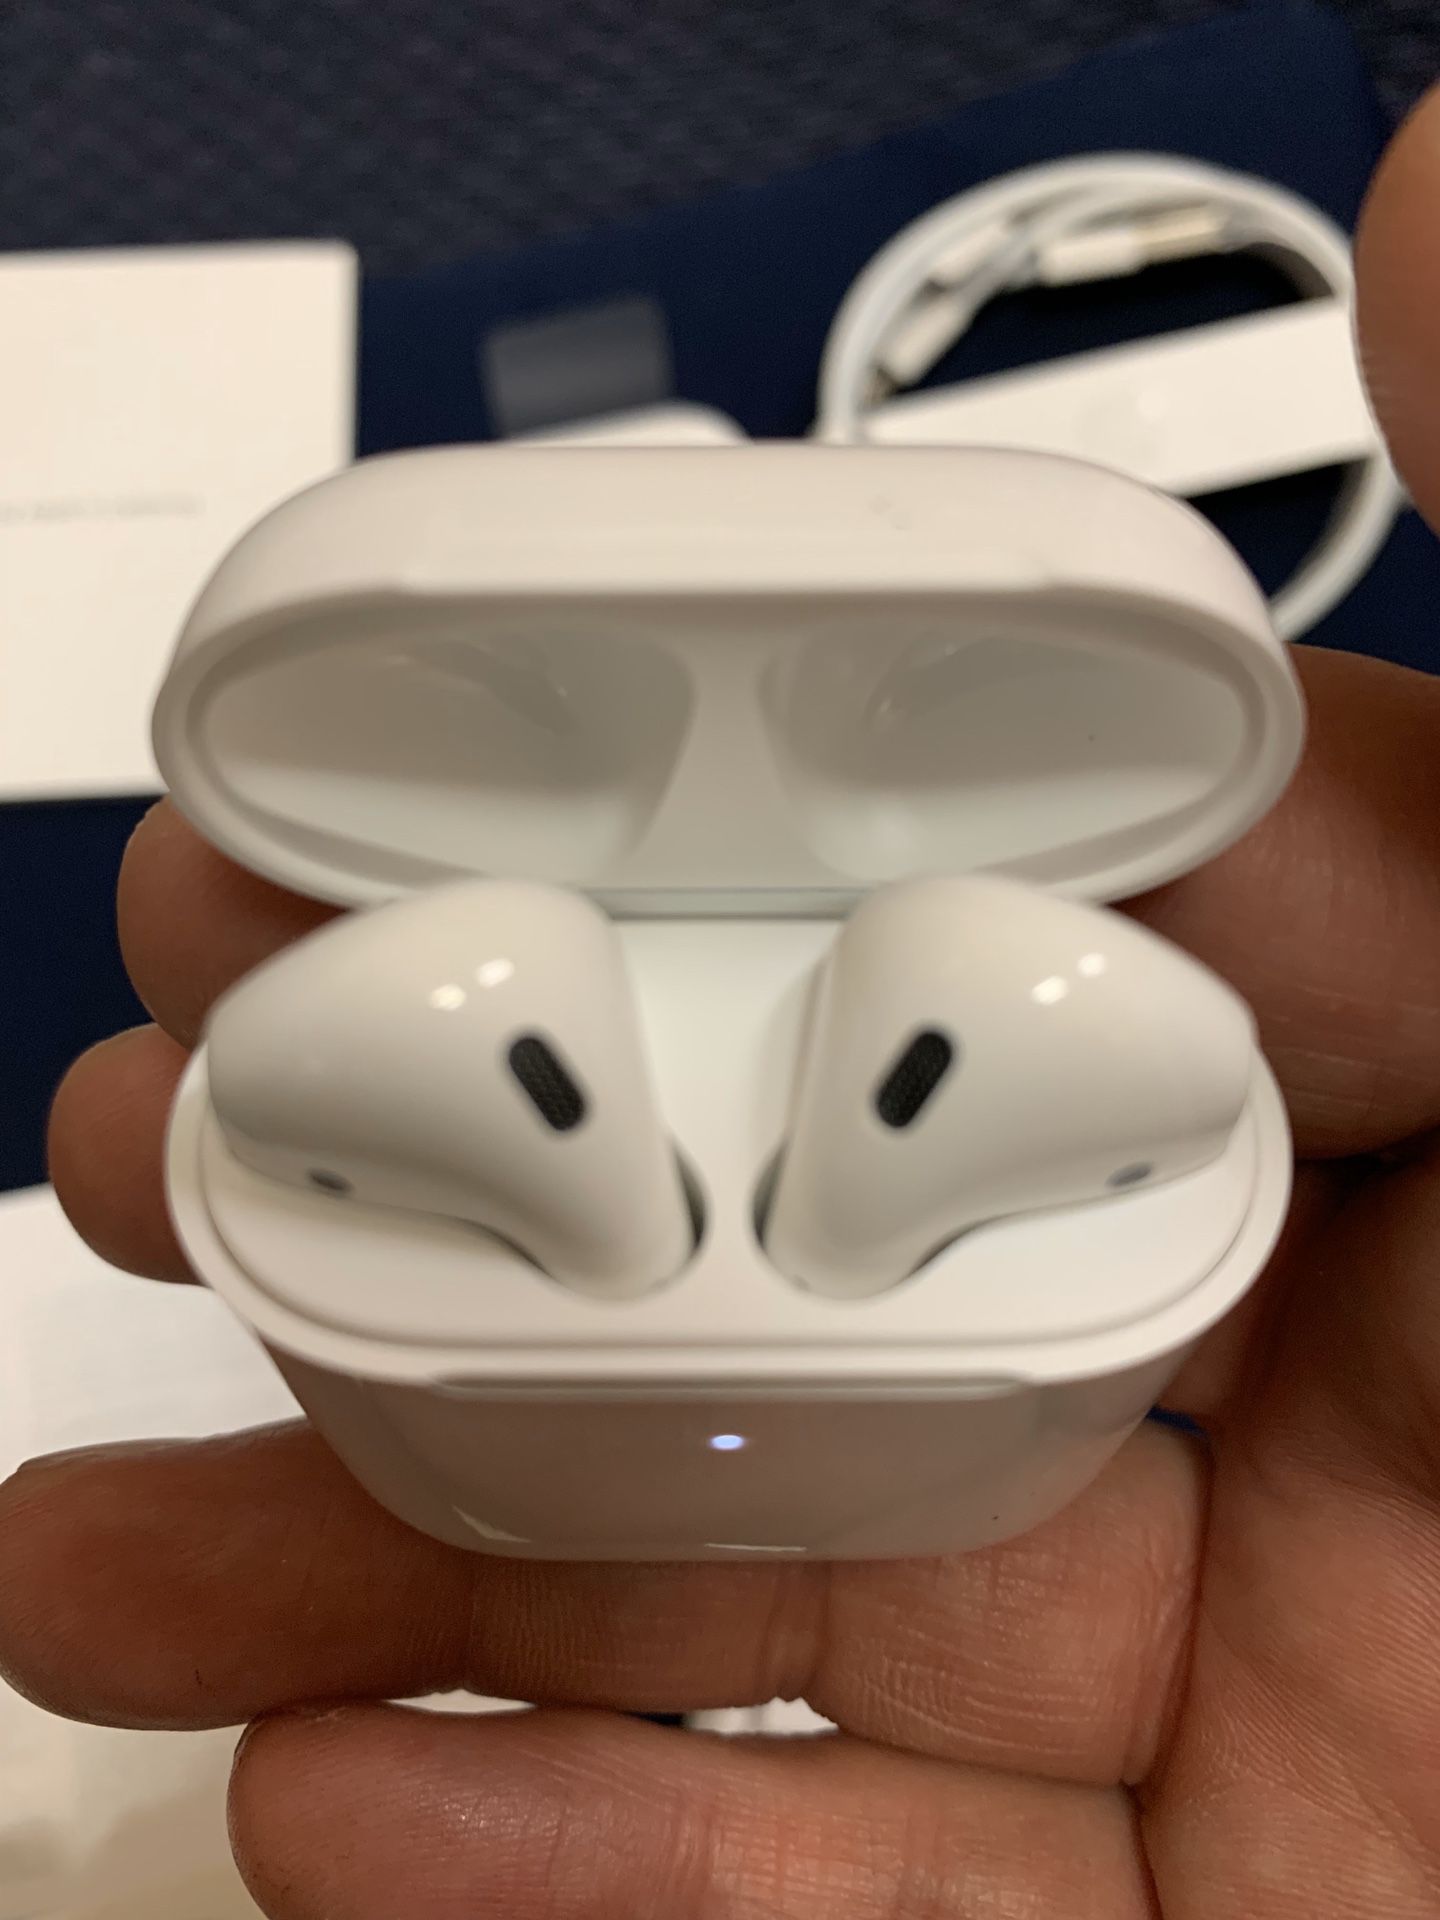 Apple AirPods Wireless Charging 2nd Gen New Authentic Apple Product Try Them Out before you buy $125 firm